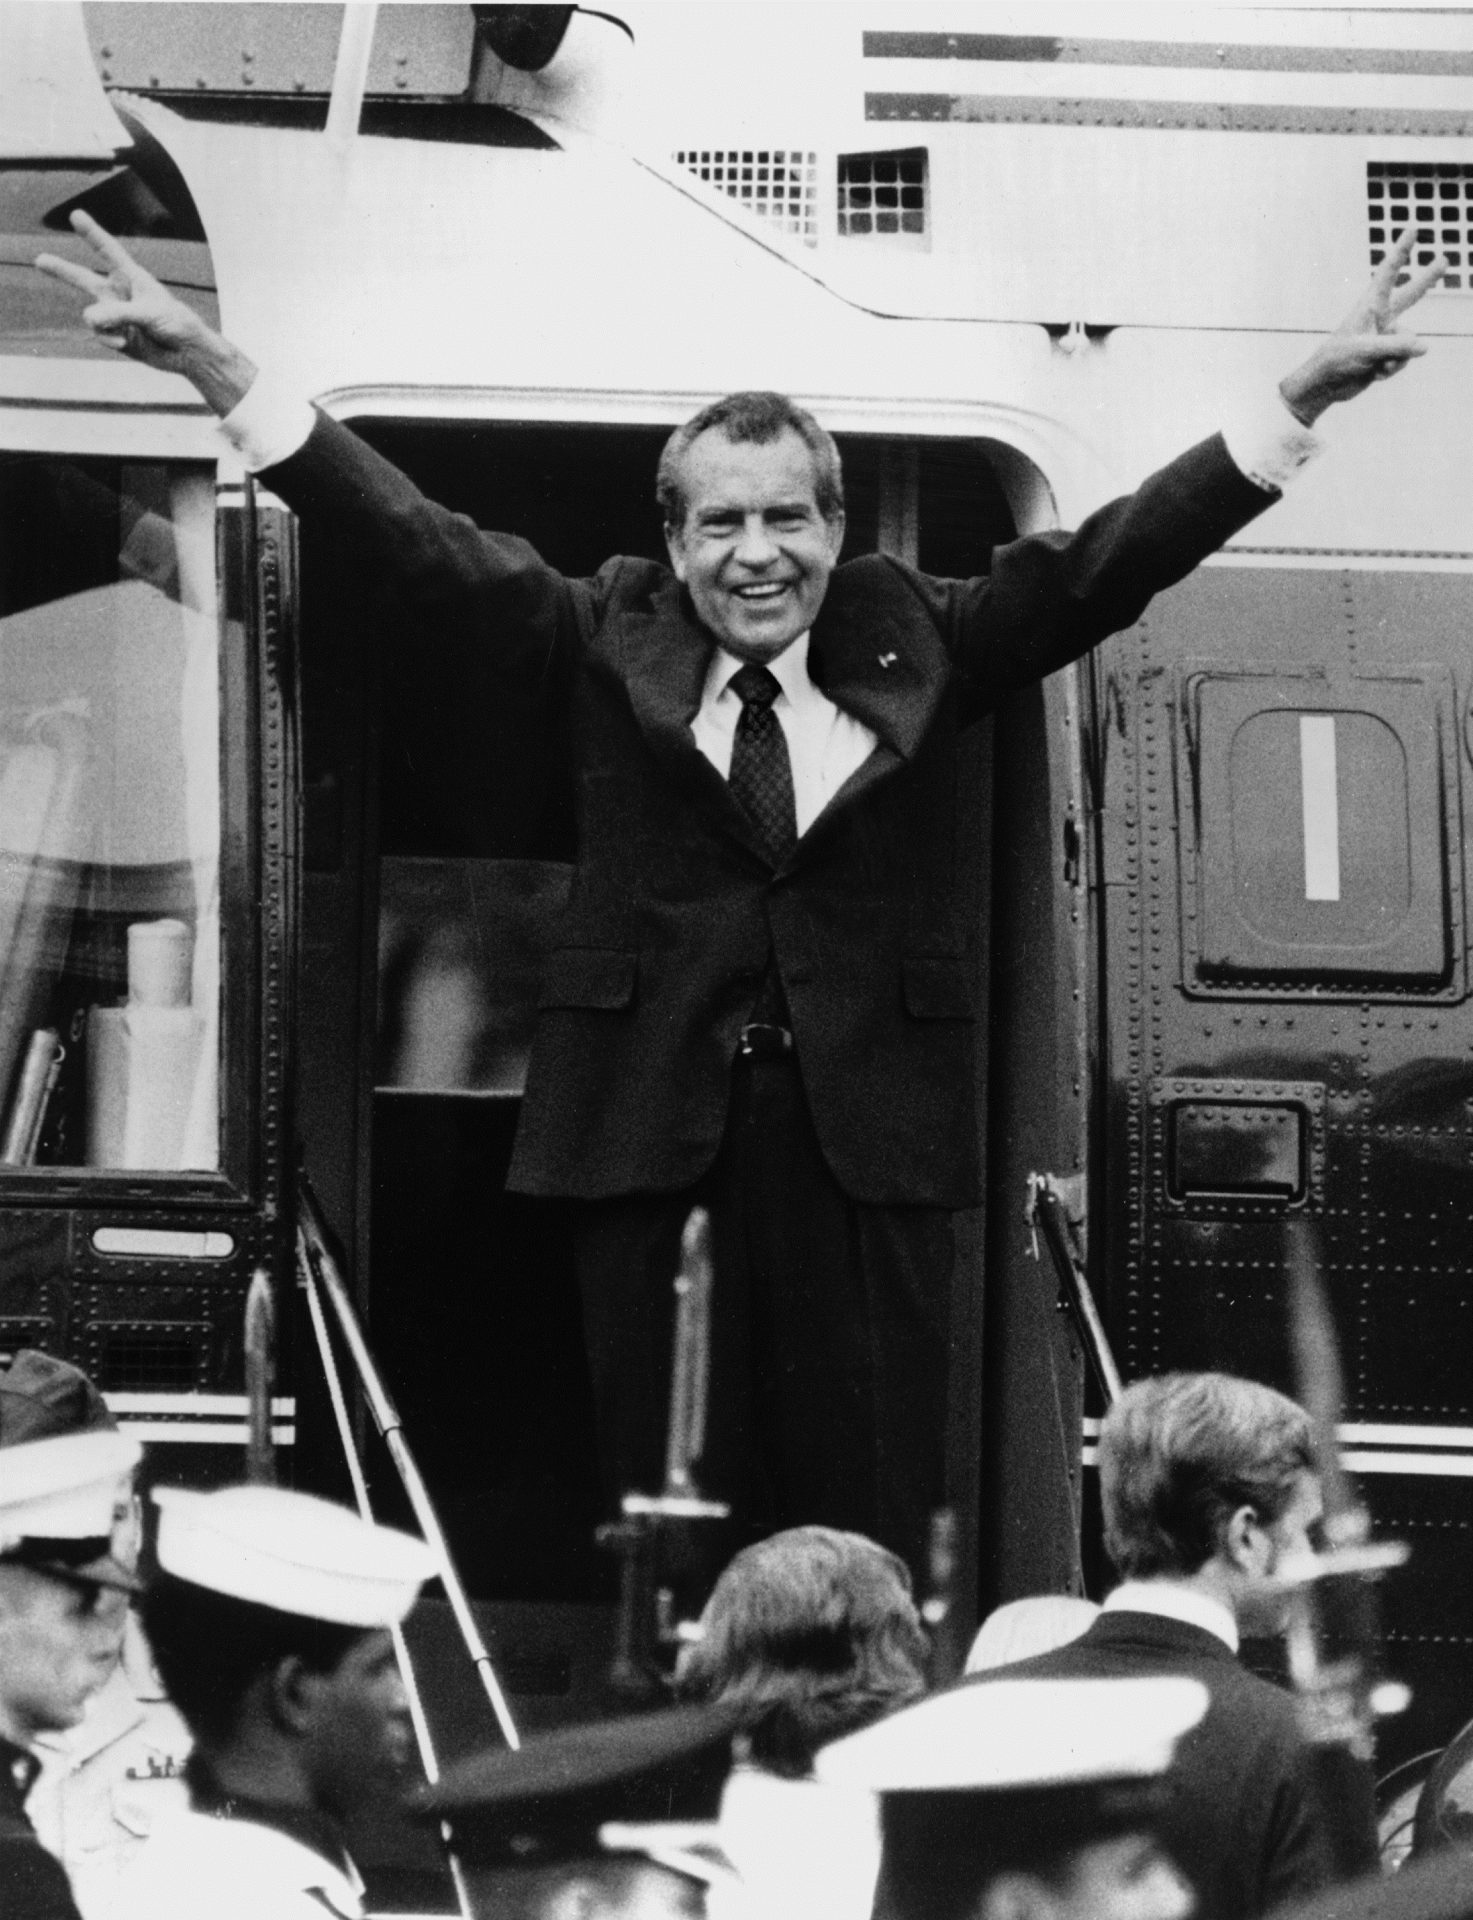 FILE PHOTO: Richard Nixon says goodbye with a victorious salute to his staff members outside the White House as he boards a helicopter after resigning the presidency on Aug. 9, 1974. Nixon was the first president in American history to resign the nation's highest office. His resignation came after approval of an impeachment article against him by the House Judiciary Committee for withholding evidence from Congress. He stepped down as the 37th president with a 2,026-day term, urging Americans to rally behind Gerald R. Ford. President Ford fully pardoned Nixon one month later.